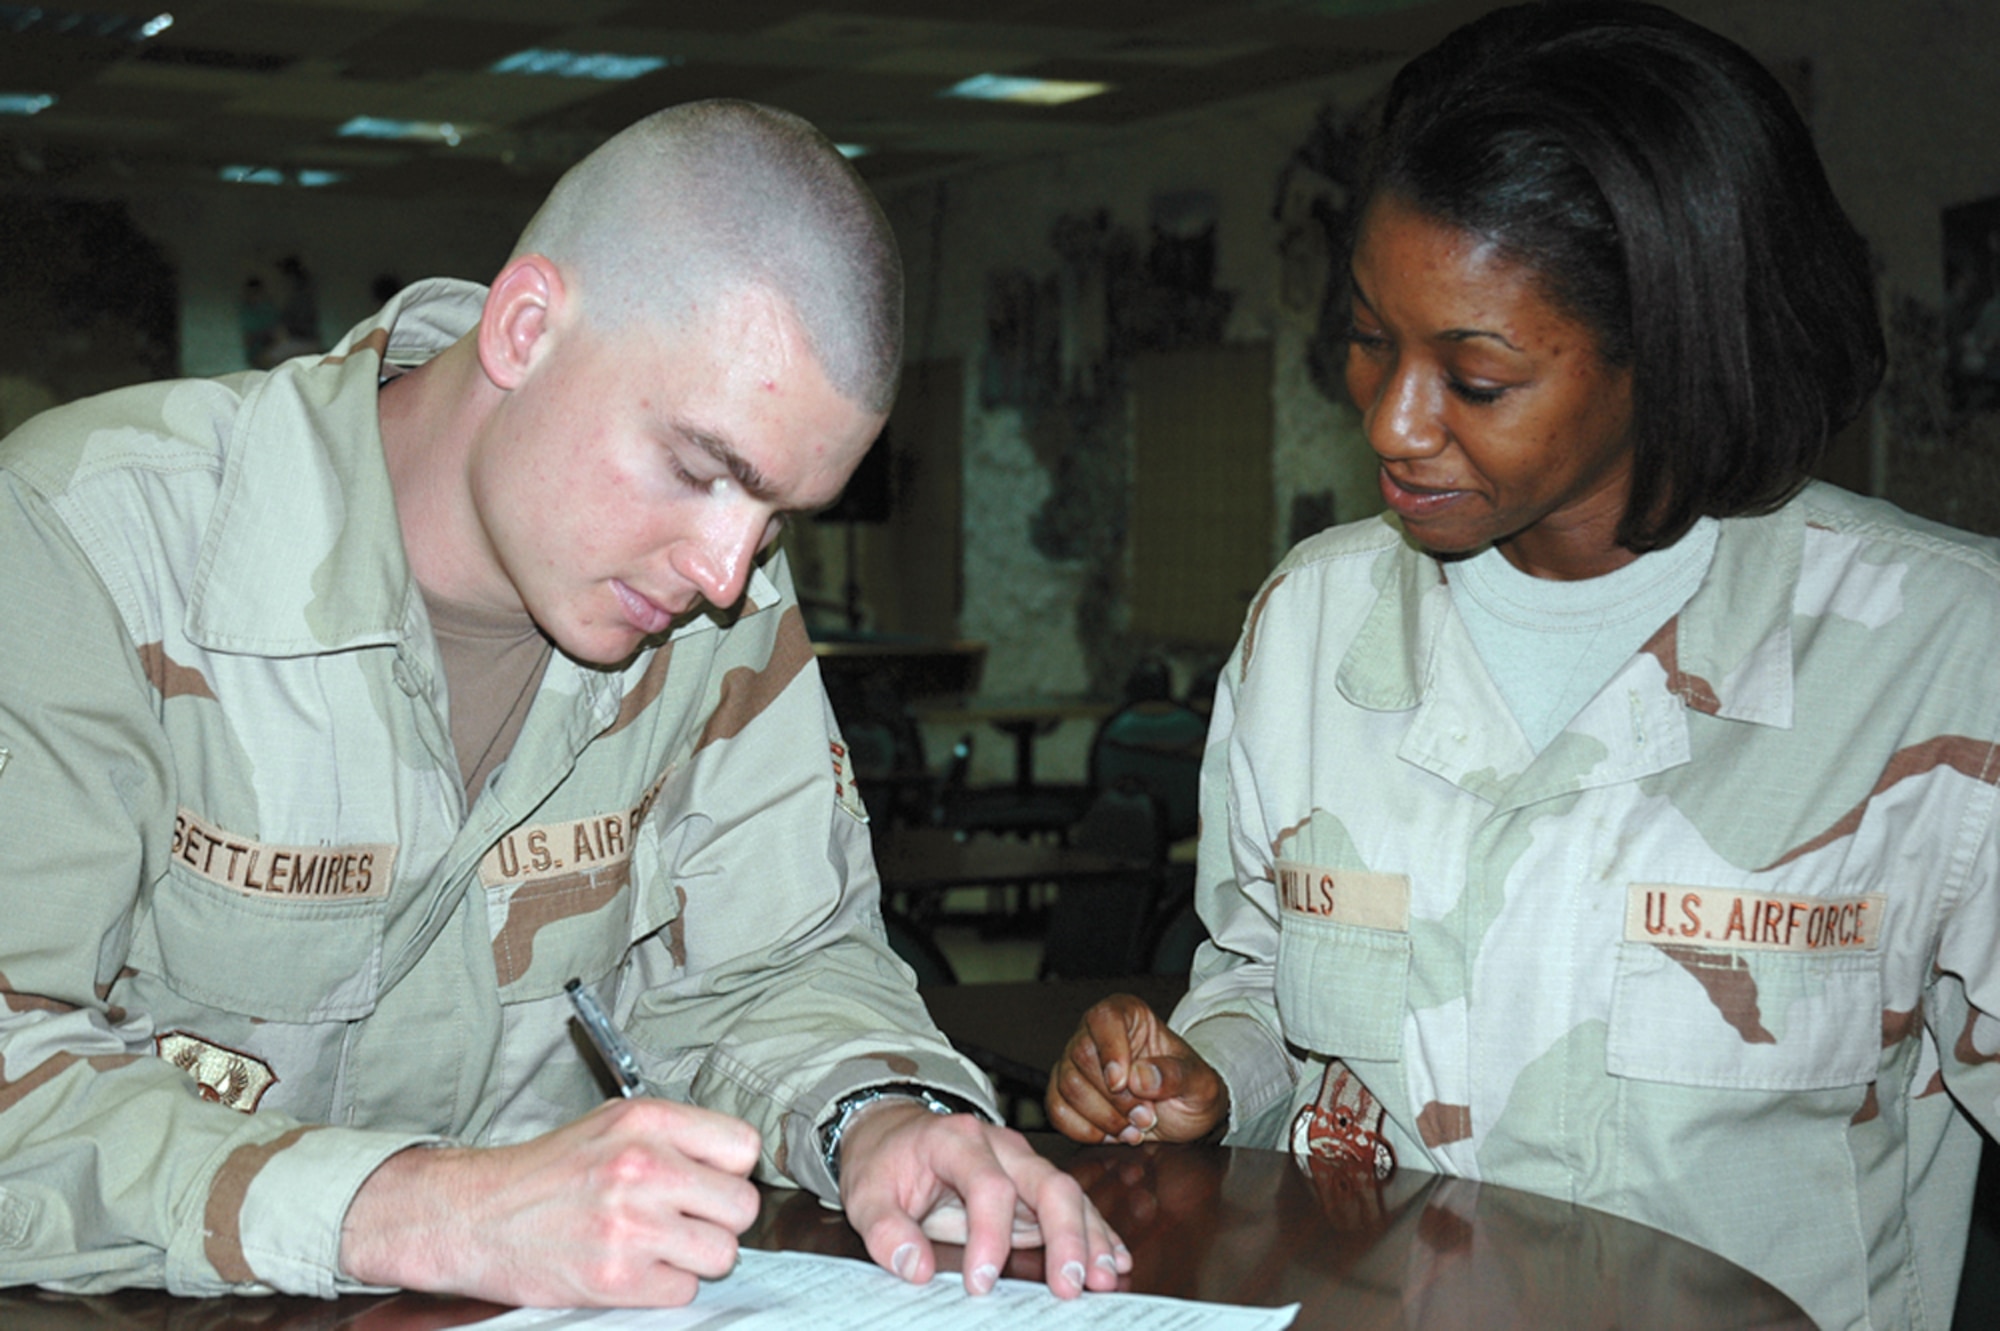 Tech. Sgt. Rochelle Wills assists Senior Airman Pat Settlemires in filling out his registration consent form during a bone marrow registration drive at a forward operating base in Southwest Asia. The drive was organized by a deployed Airman in memory of her son, who lost his battle with acute lymphoblastic leukemia last September. The drive drew 685 new registrants to the national donor registry. Sergeant Wills and Airman Settlemires are with the 379th Air Expeditionary Wing. (U.S. Air Force photo/Staff Sgt. Celena Wilson)